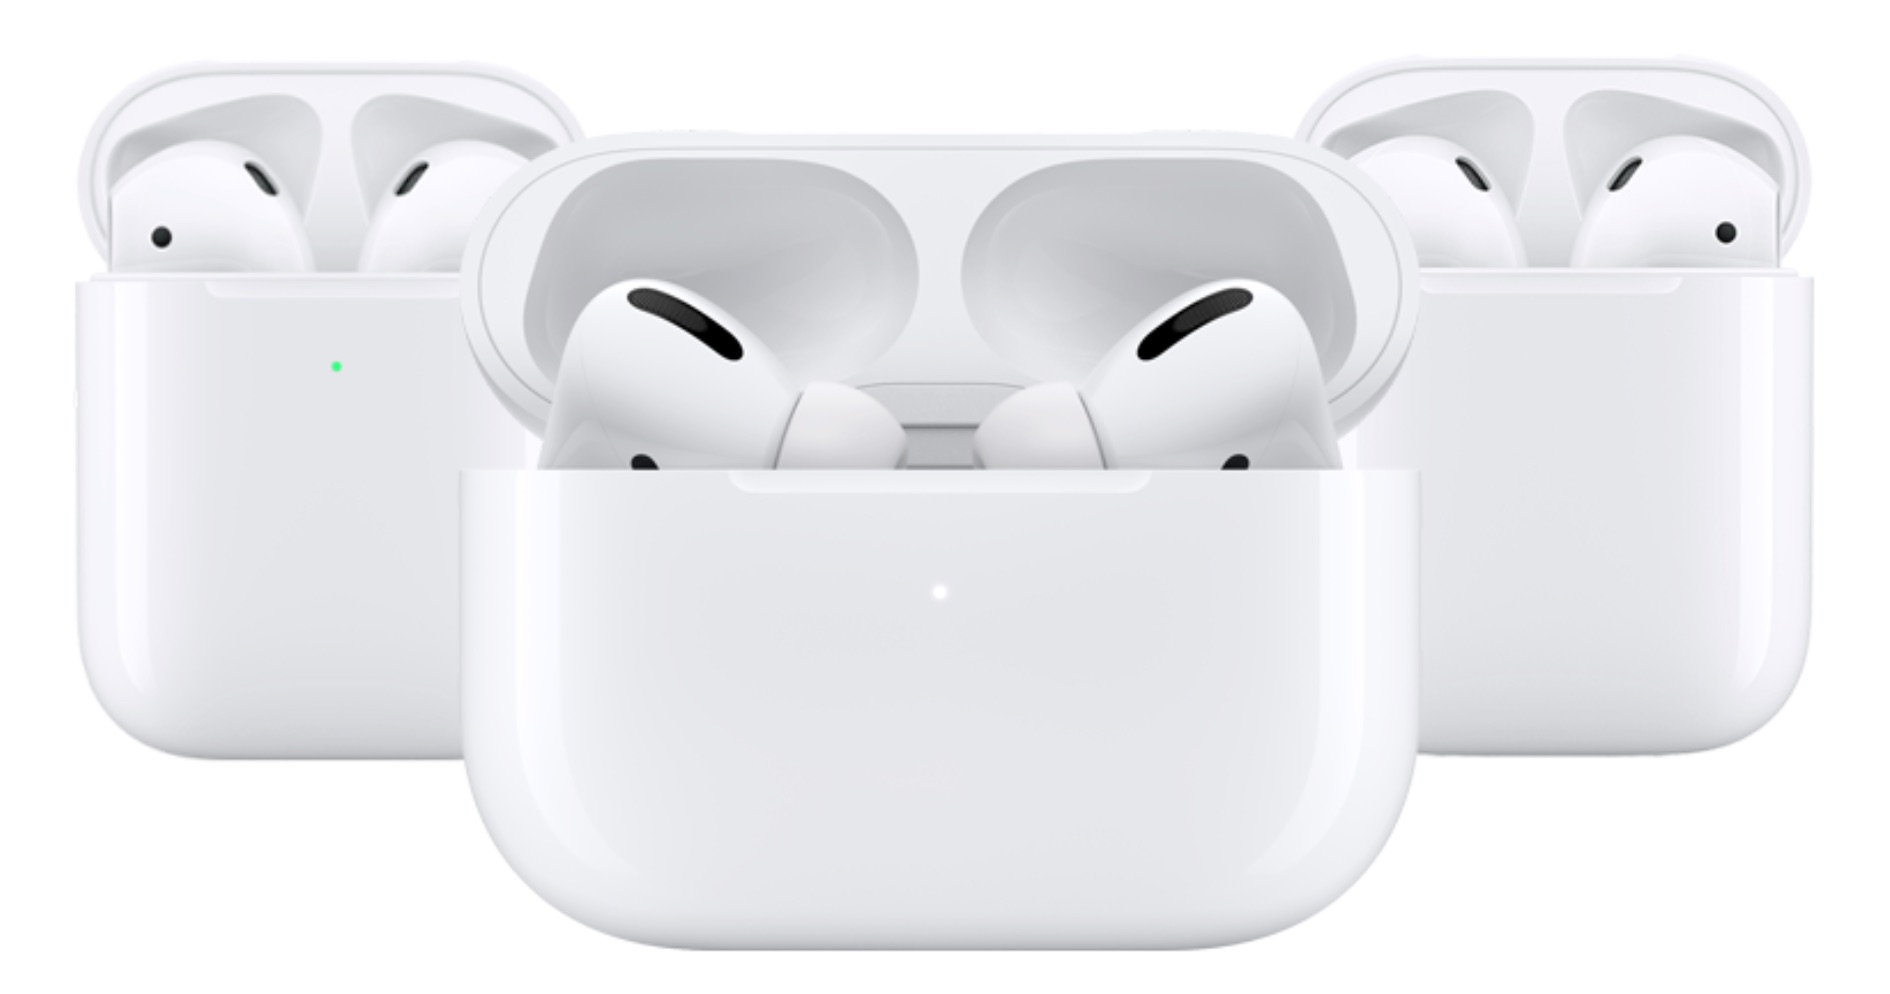 Airpods 2 huilian. AIRPODS 2 индикатор зарядки. Индикатор заряда AIRPODS Pro. AIRPODS 1 индикатор заряда. AIRPODS Pro 3.